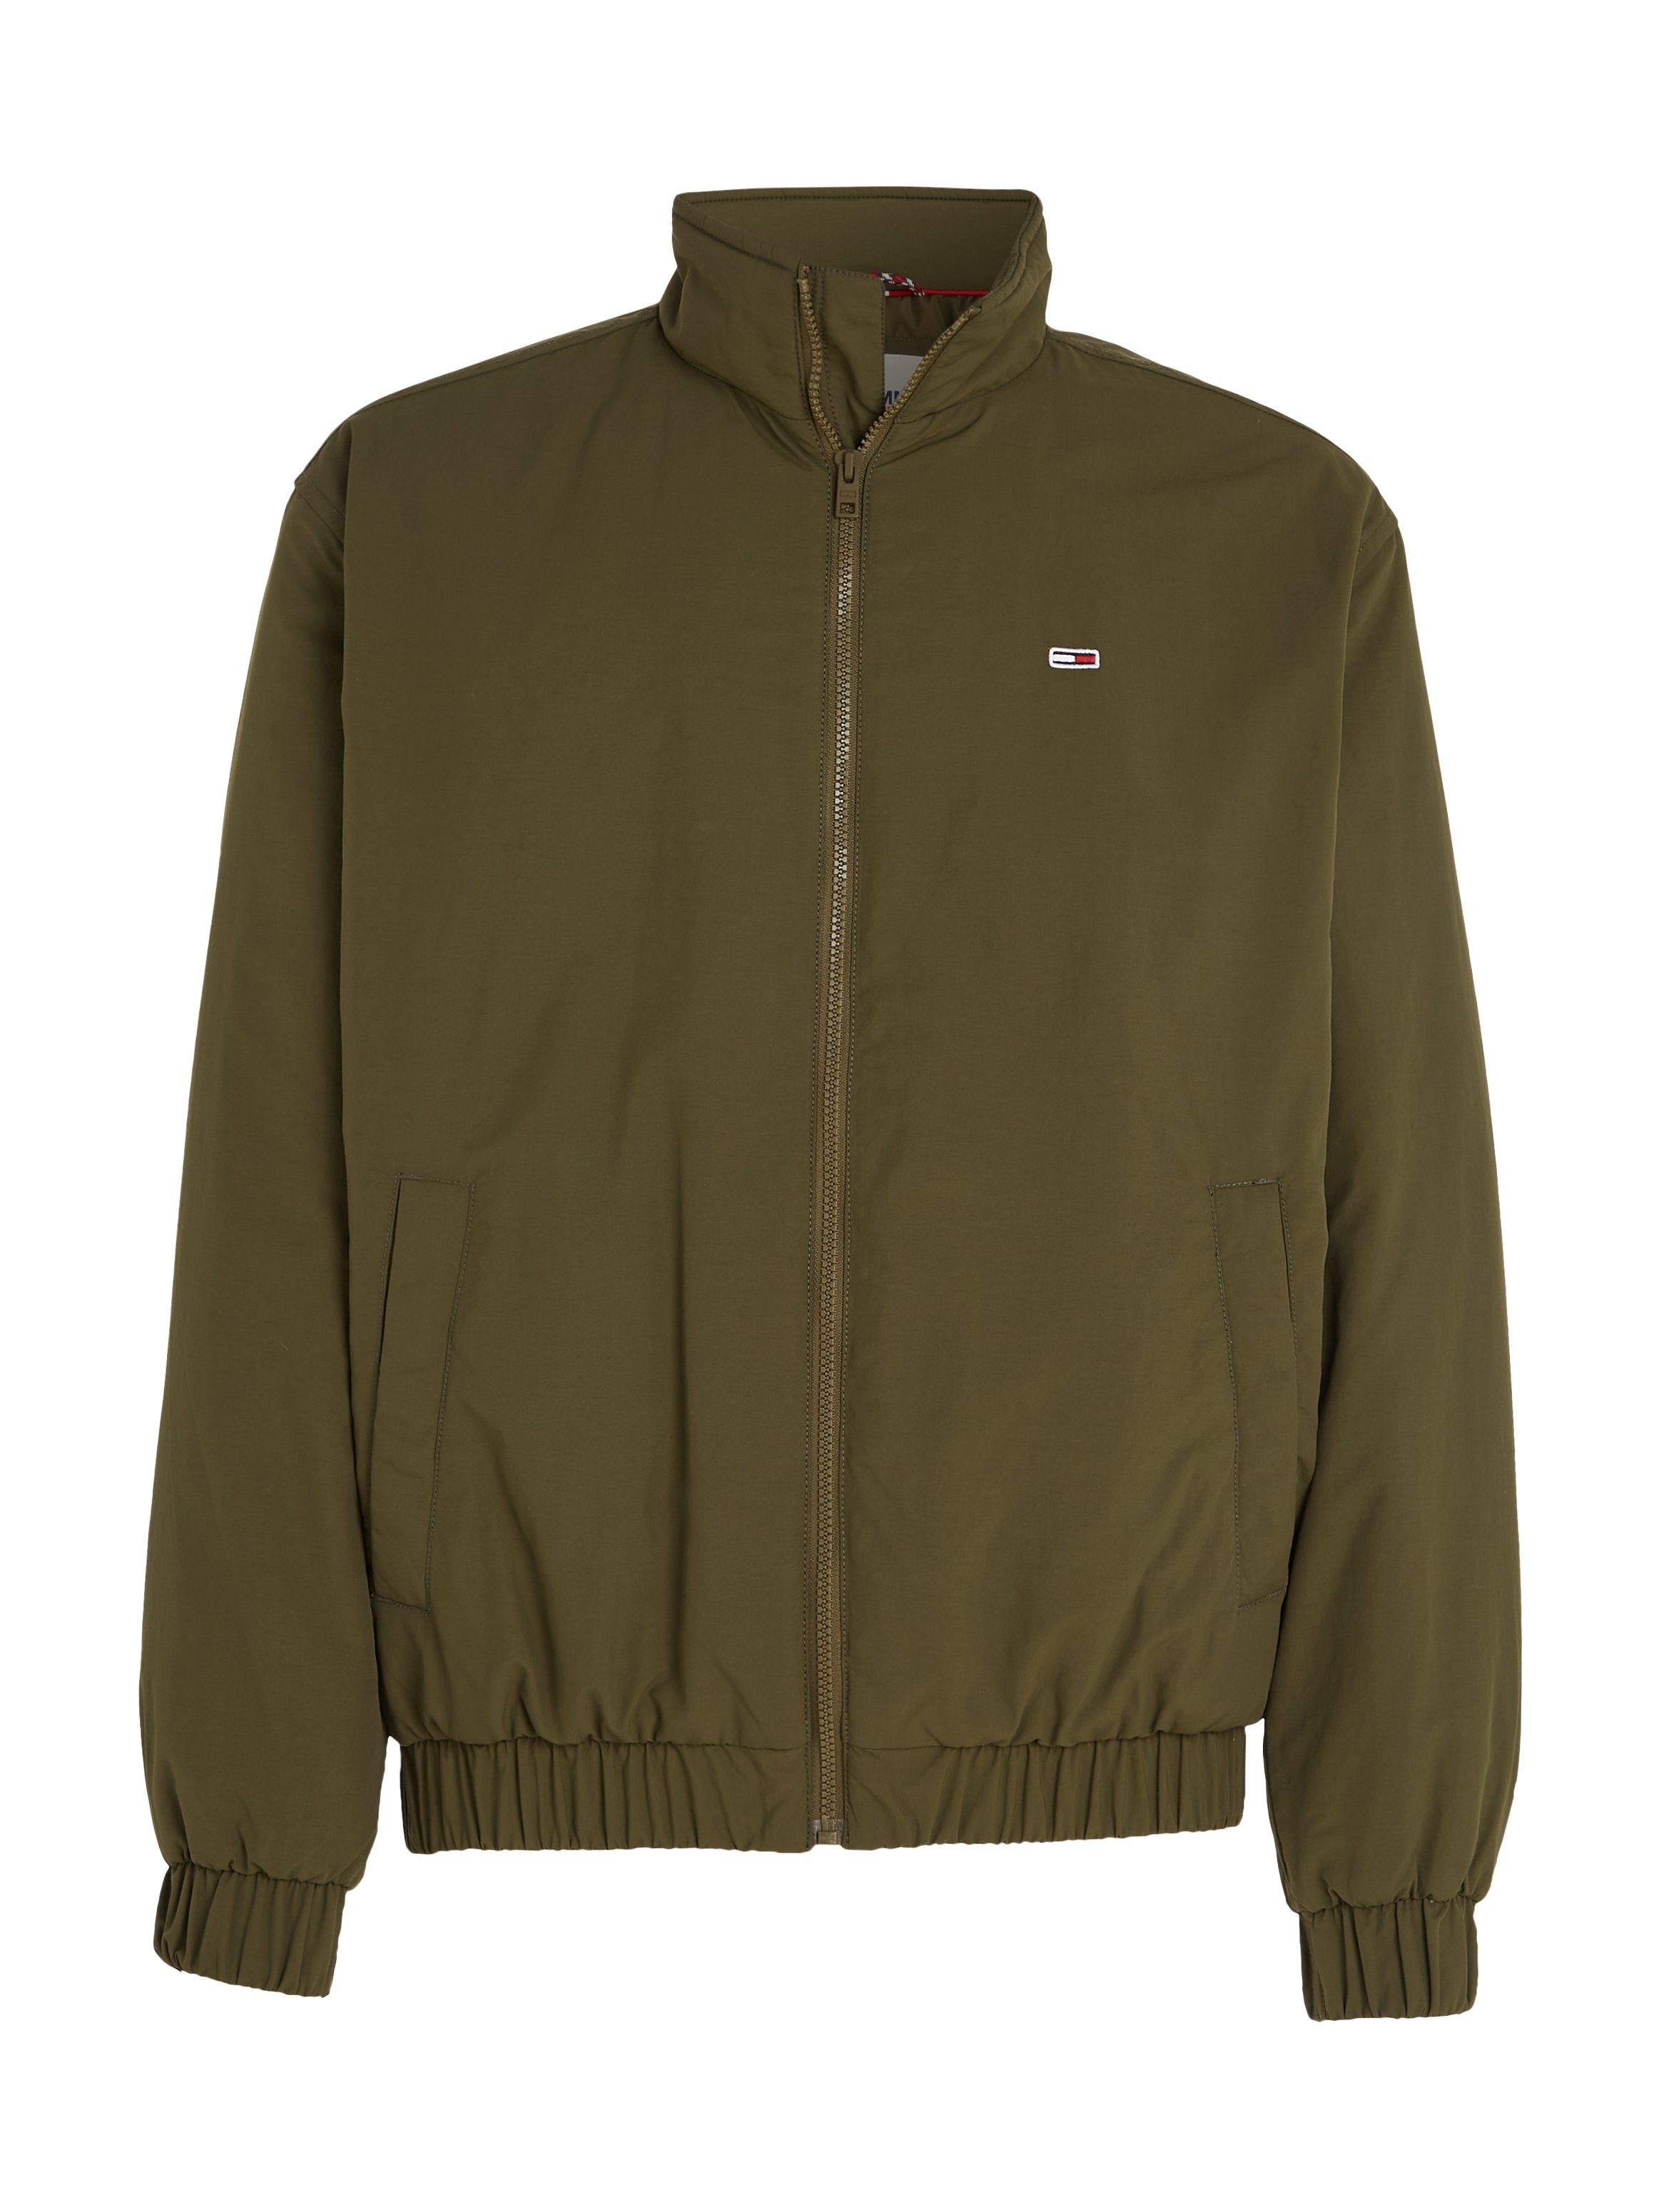 Tommy Jeans Blouson JACKET Olive TJM Green PADDED ESSENTIAL Drab